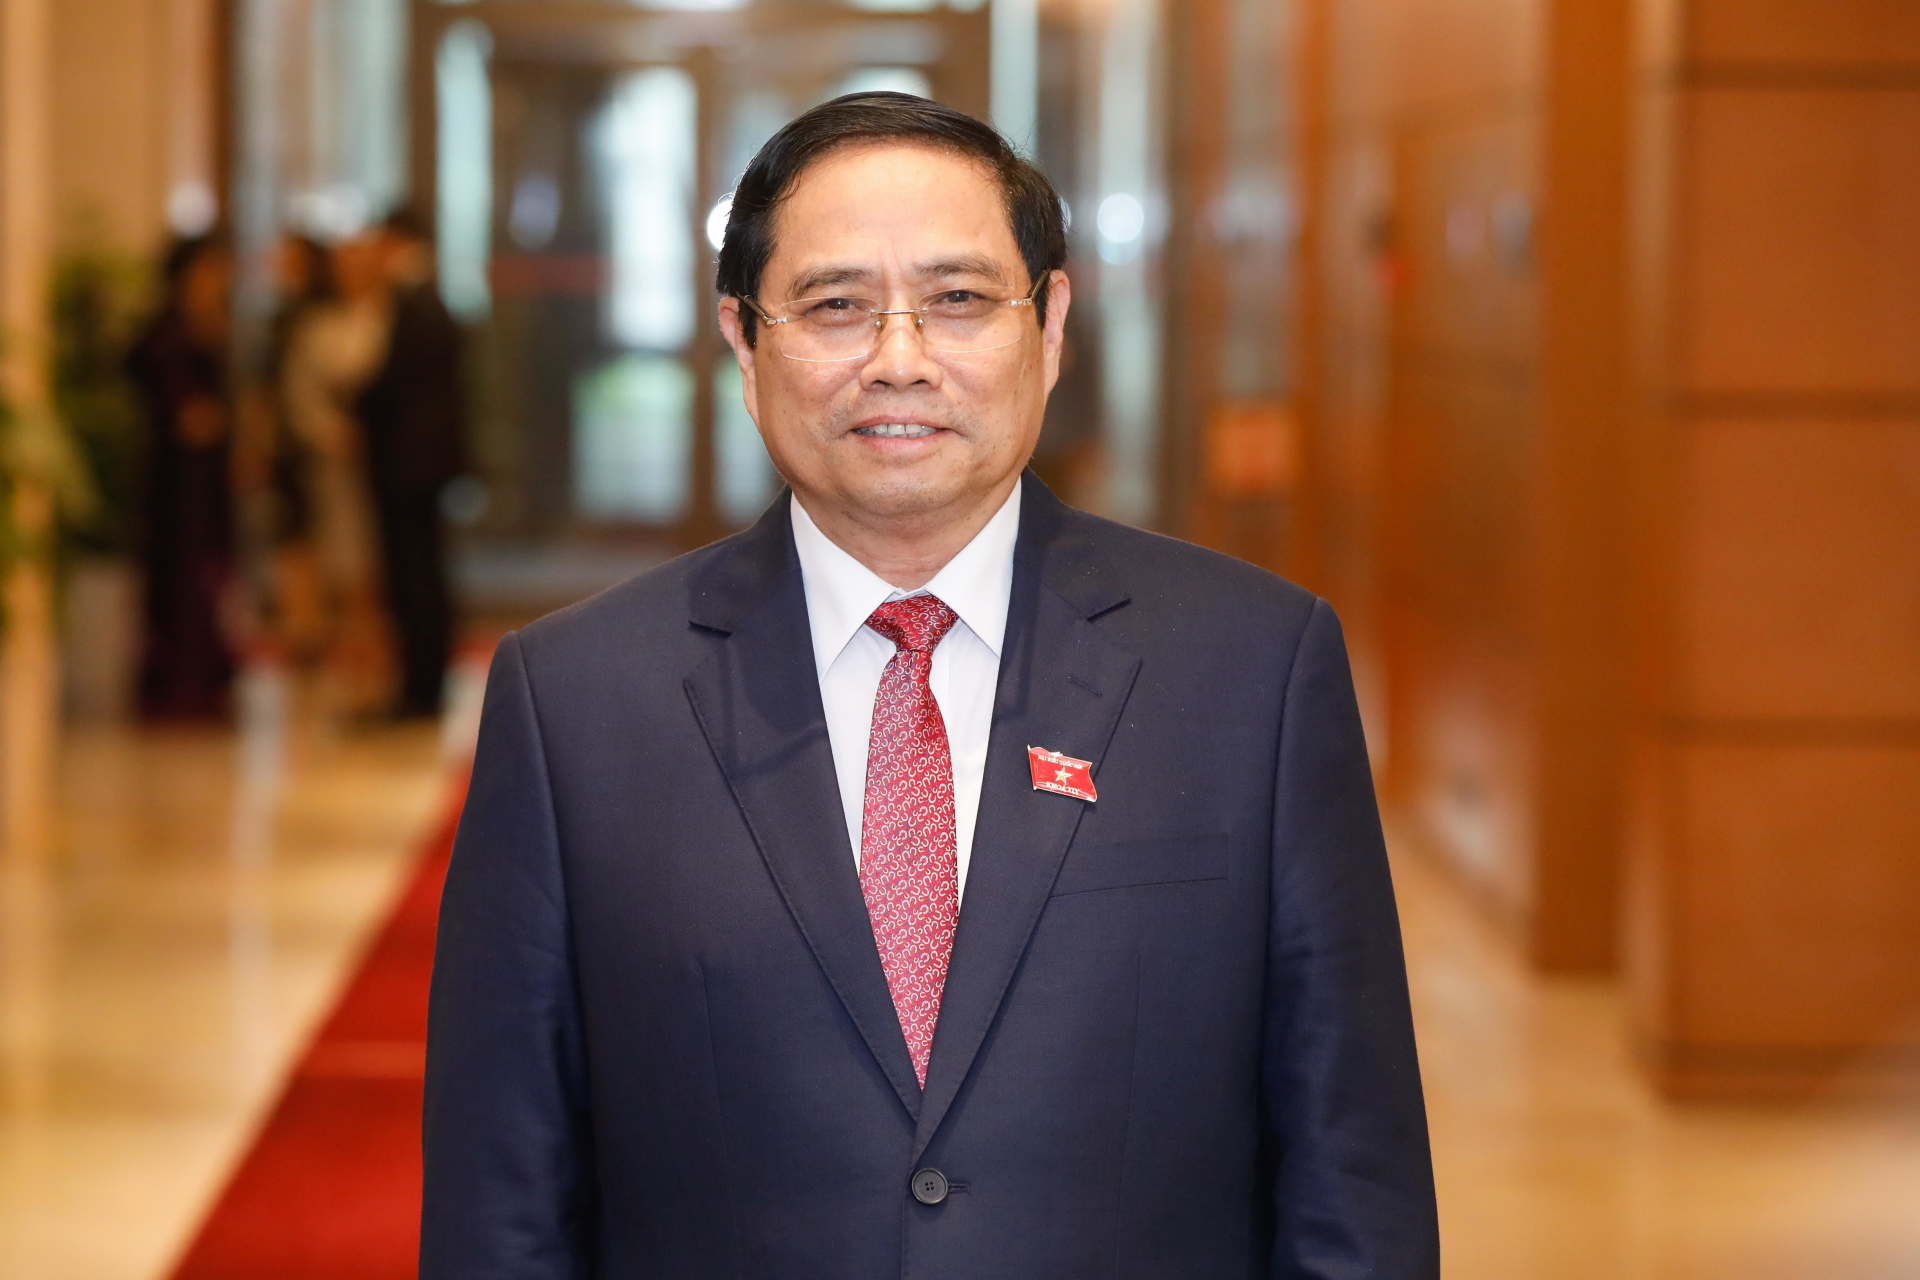 Pham Minh Chinh elected as Prime Minister of Vietnam - VietNamNet